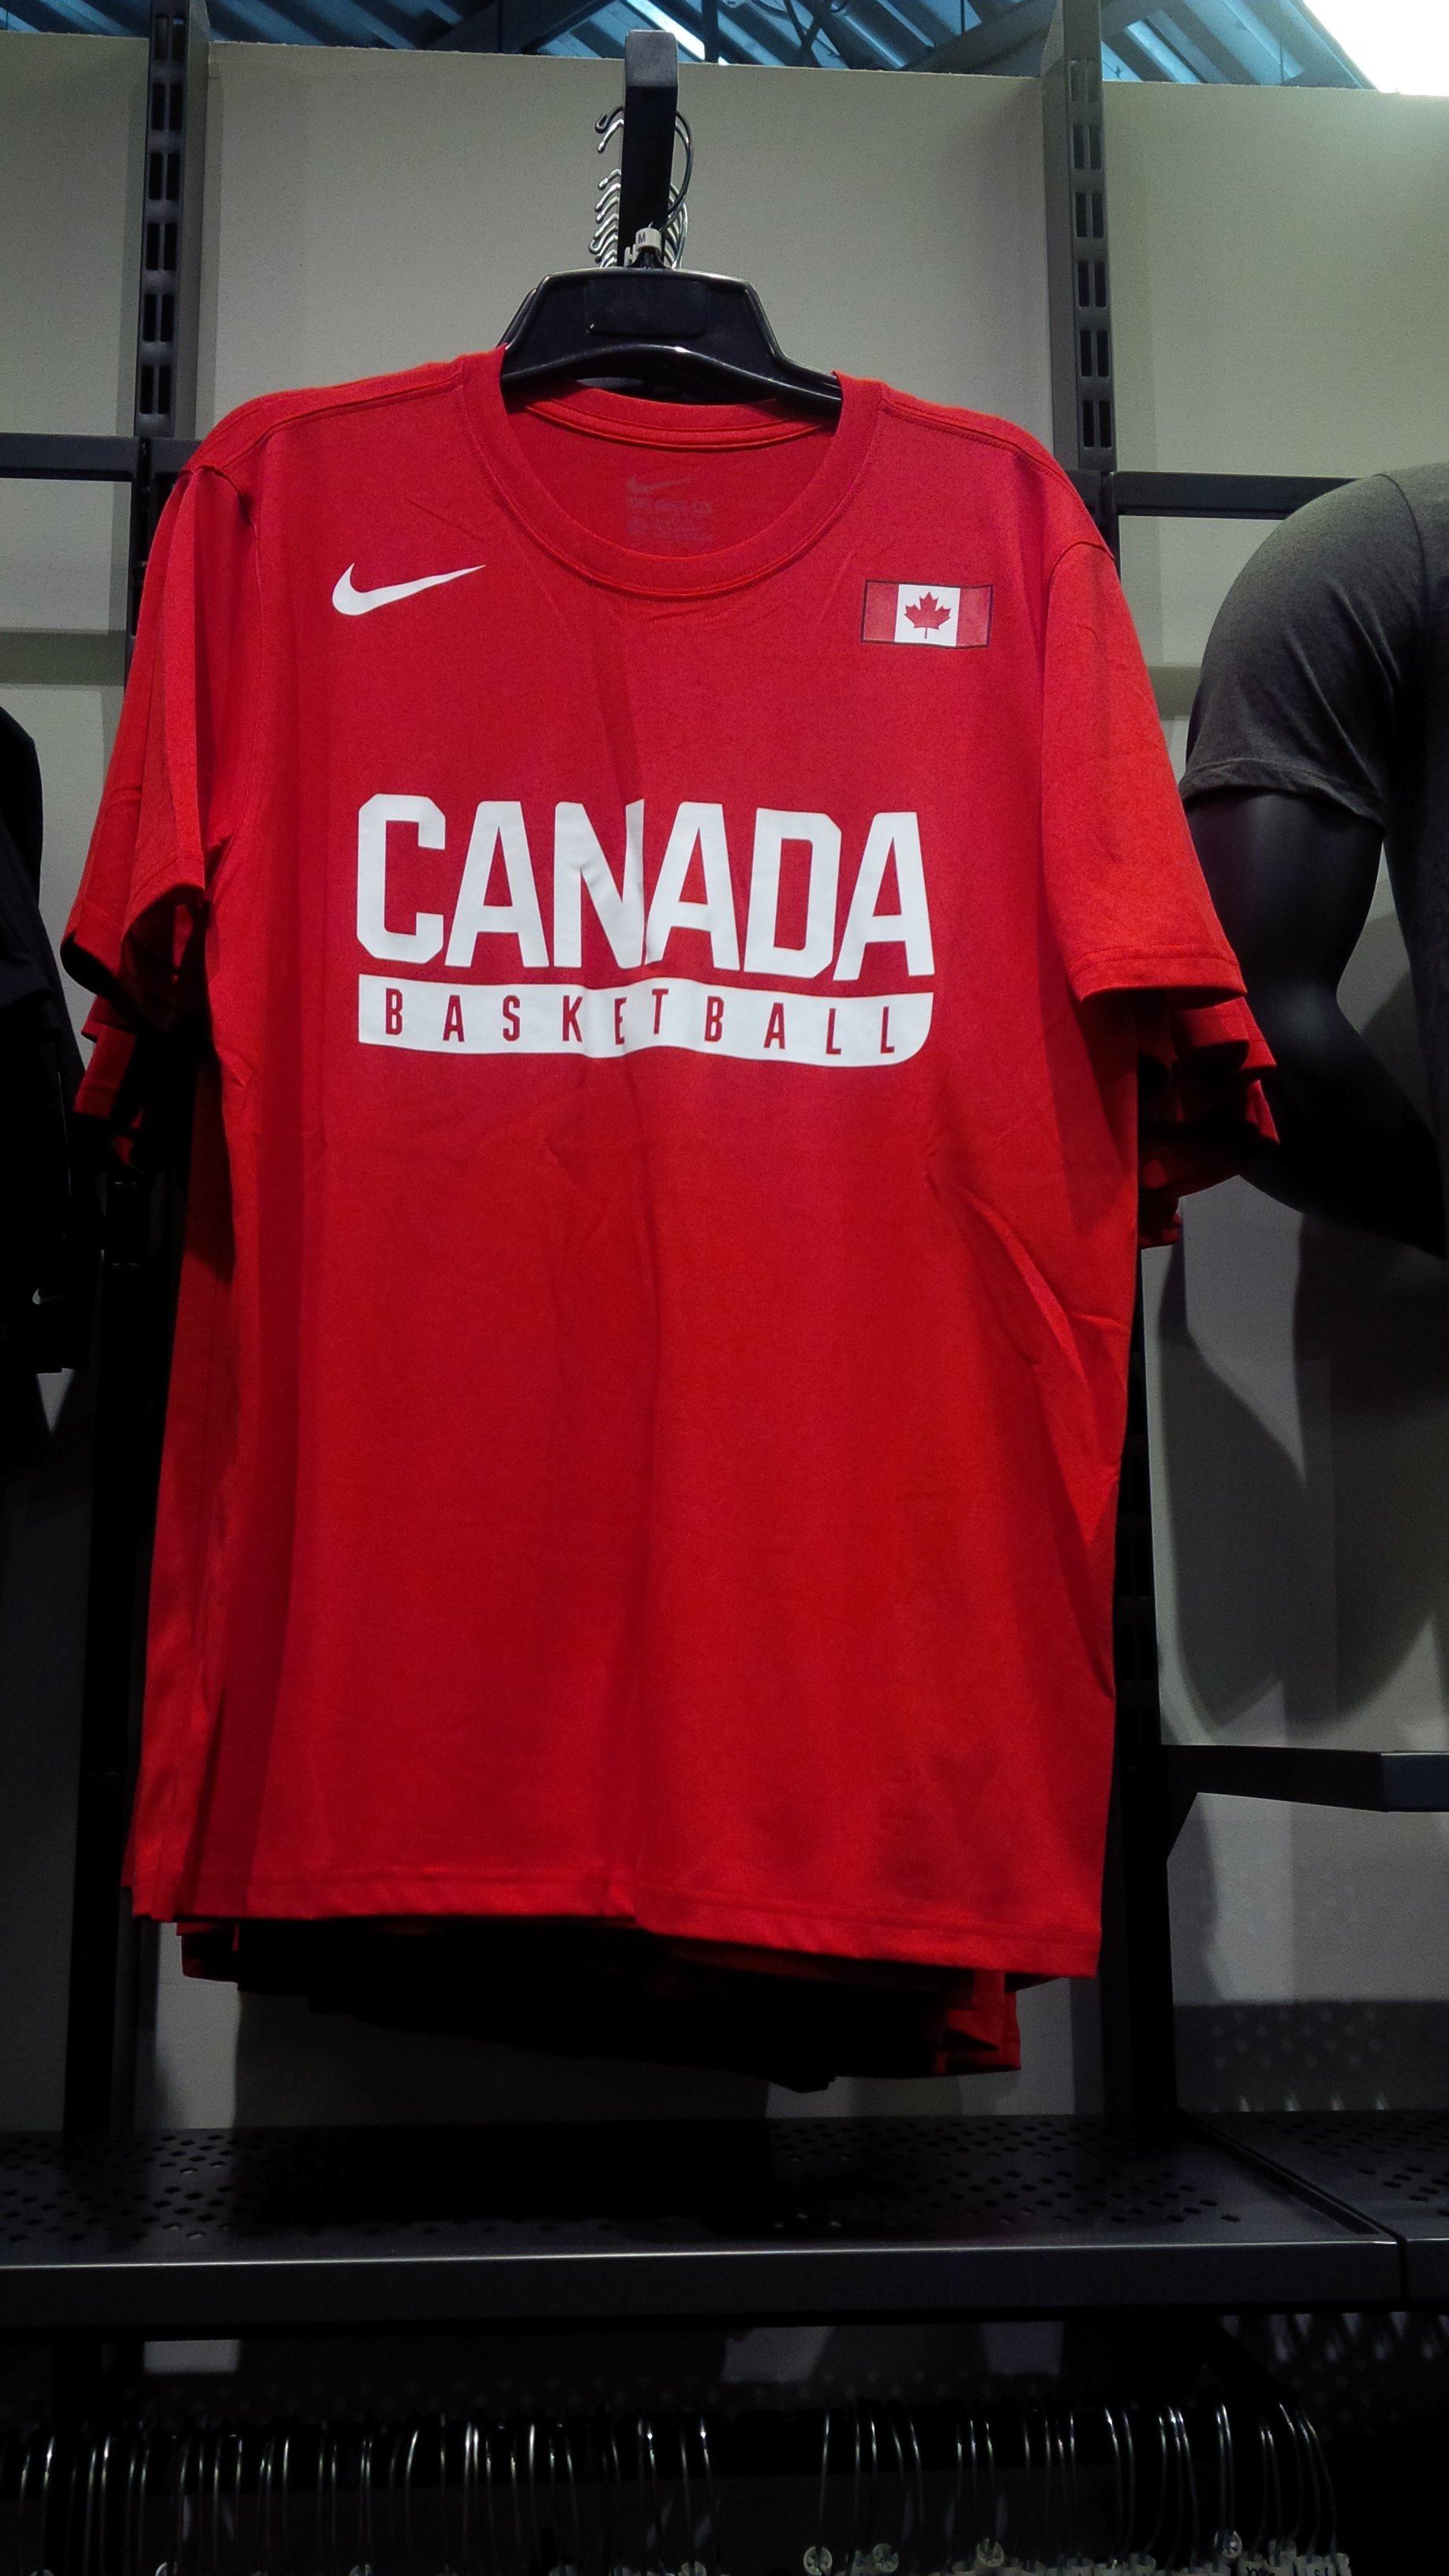 Canada on Twitter: "Check out the latest Team Canada gear the Nike Store! Get yours while quantities last! https://t.co/EZeHDXBMds" / Twitter